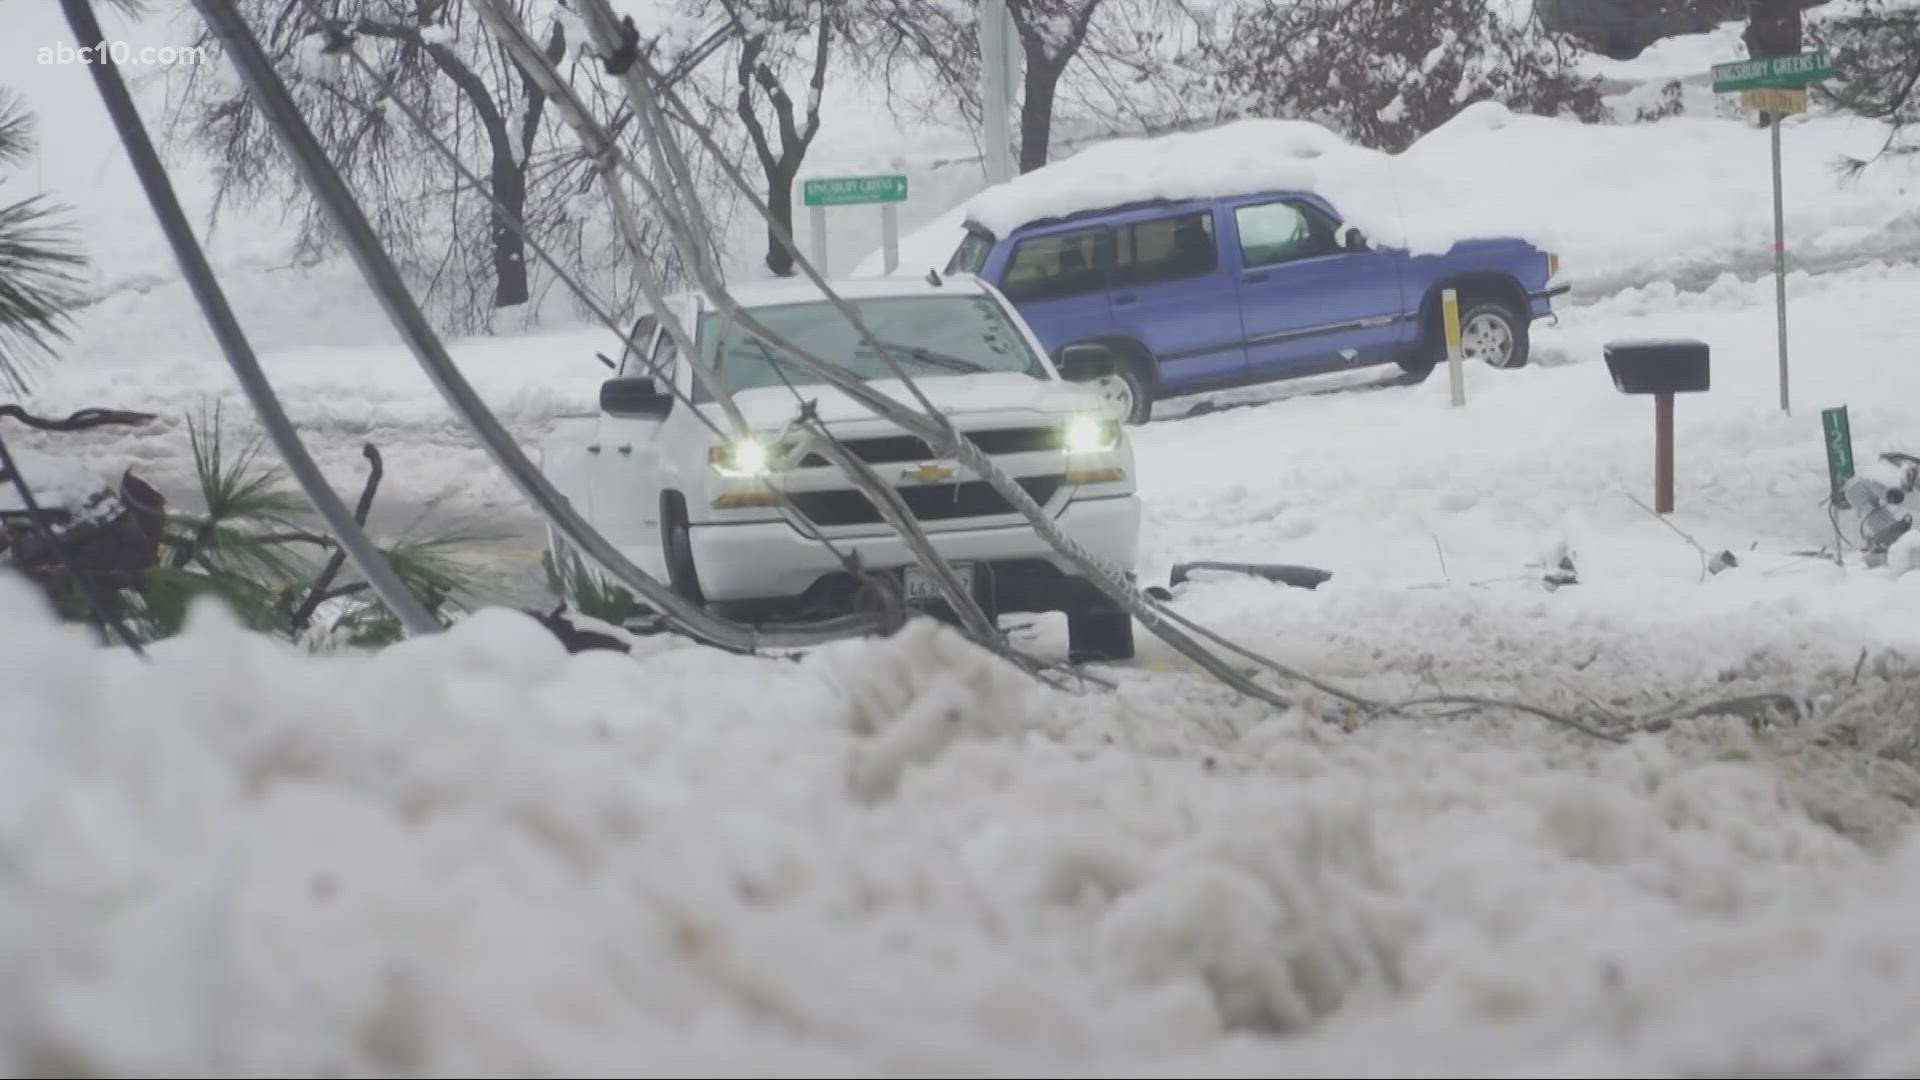 As the massive winter storm continues, many are left without power and limited resources across Northern California.